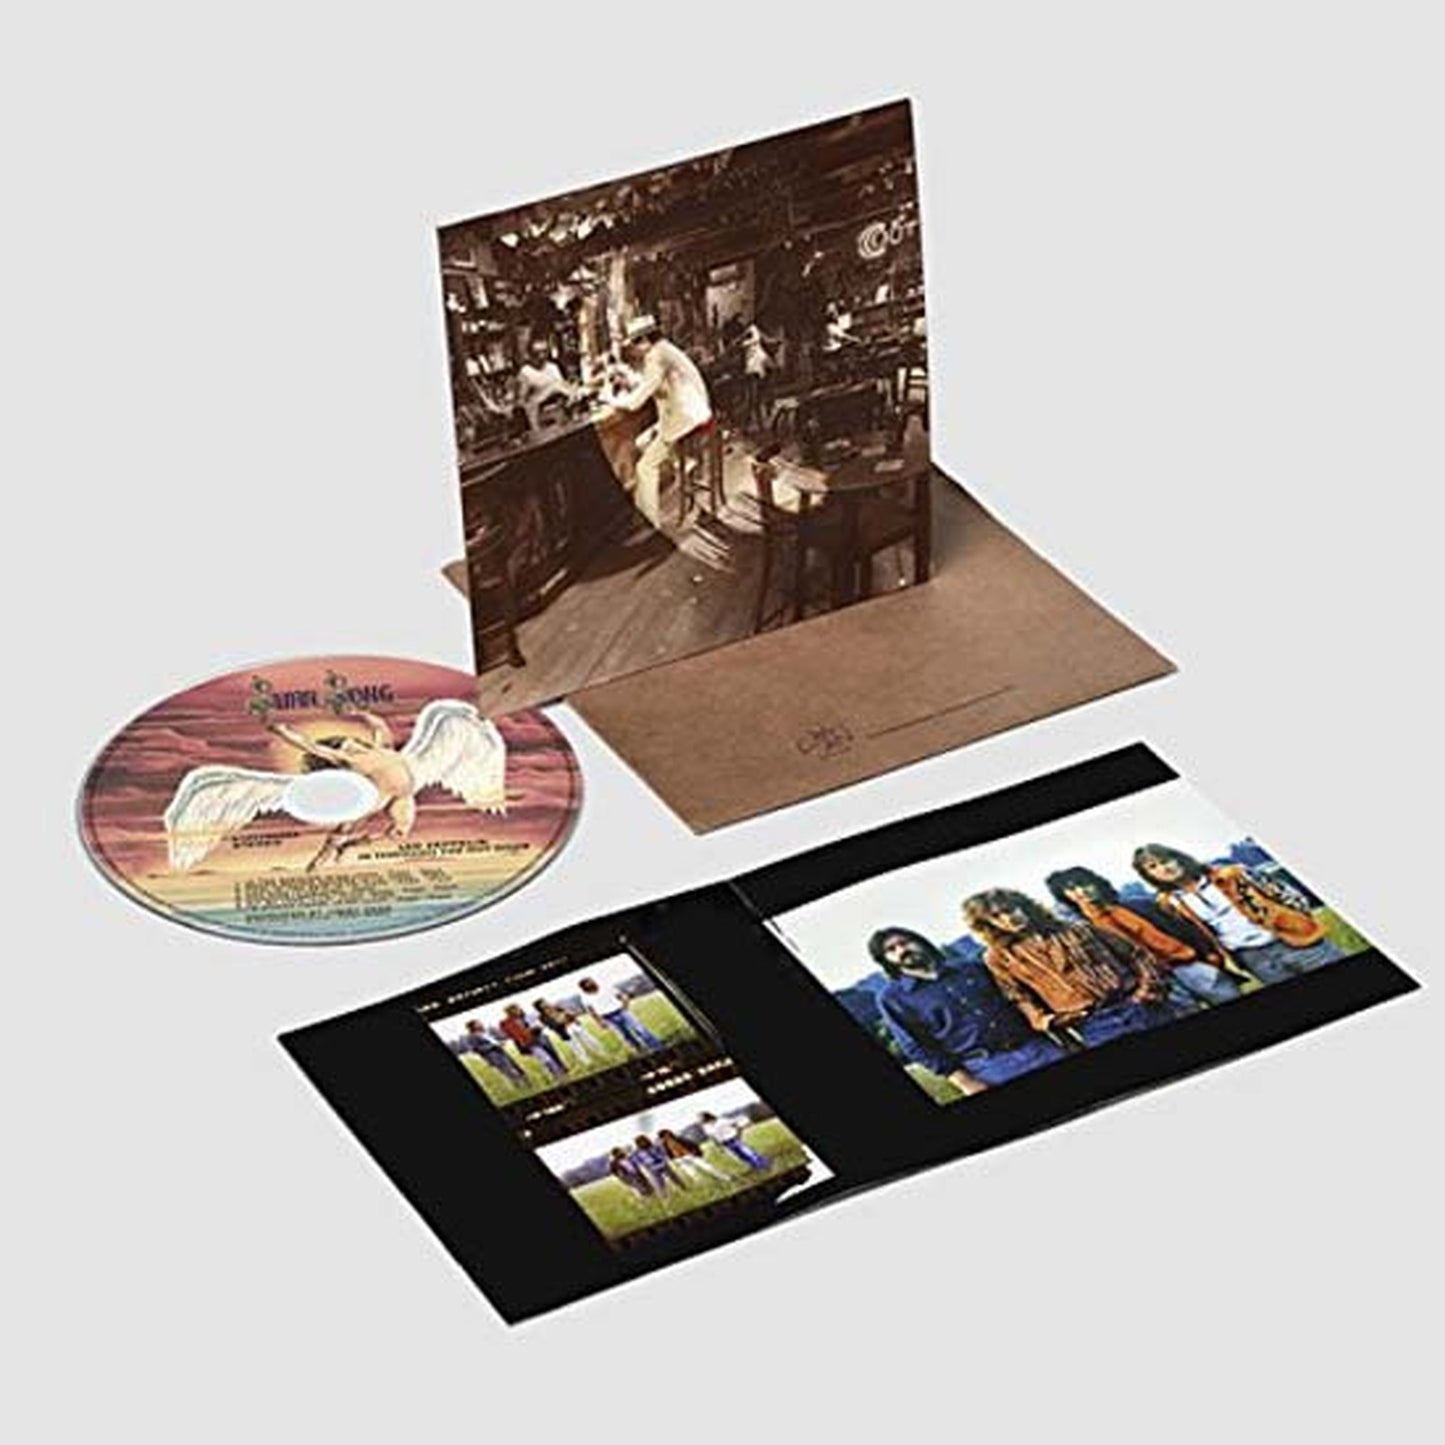 Led Zeppelin - In Through The Out Door Standard Edition - Japan CD